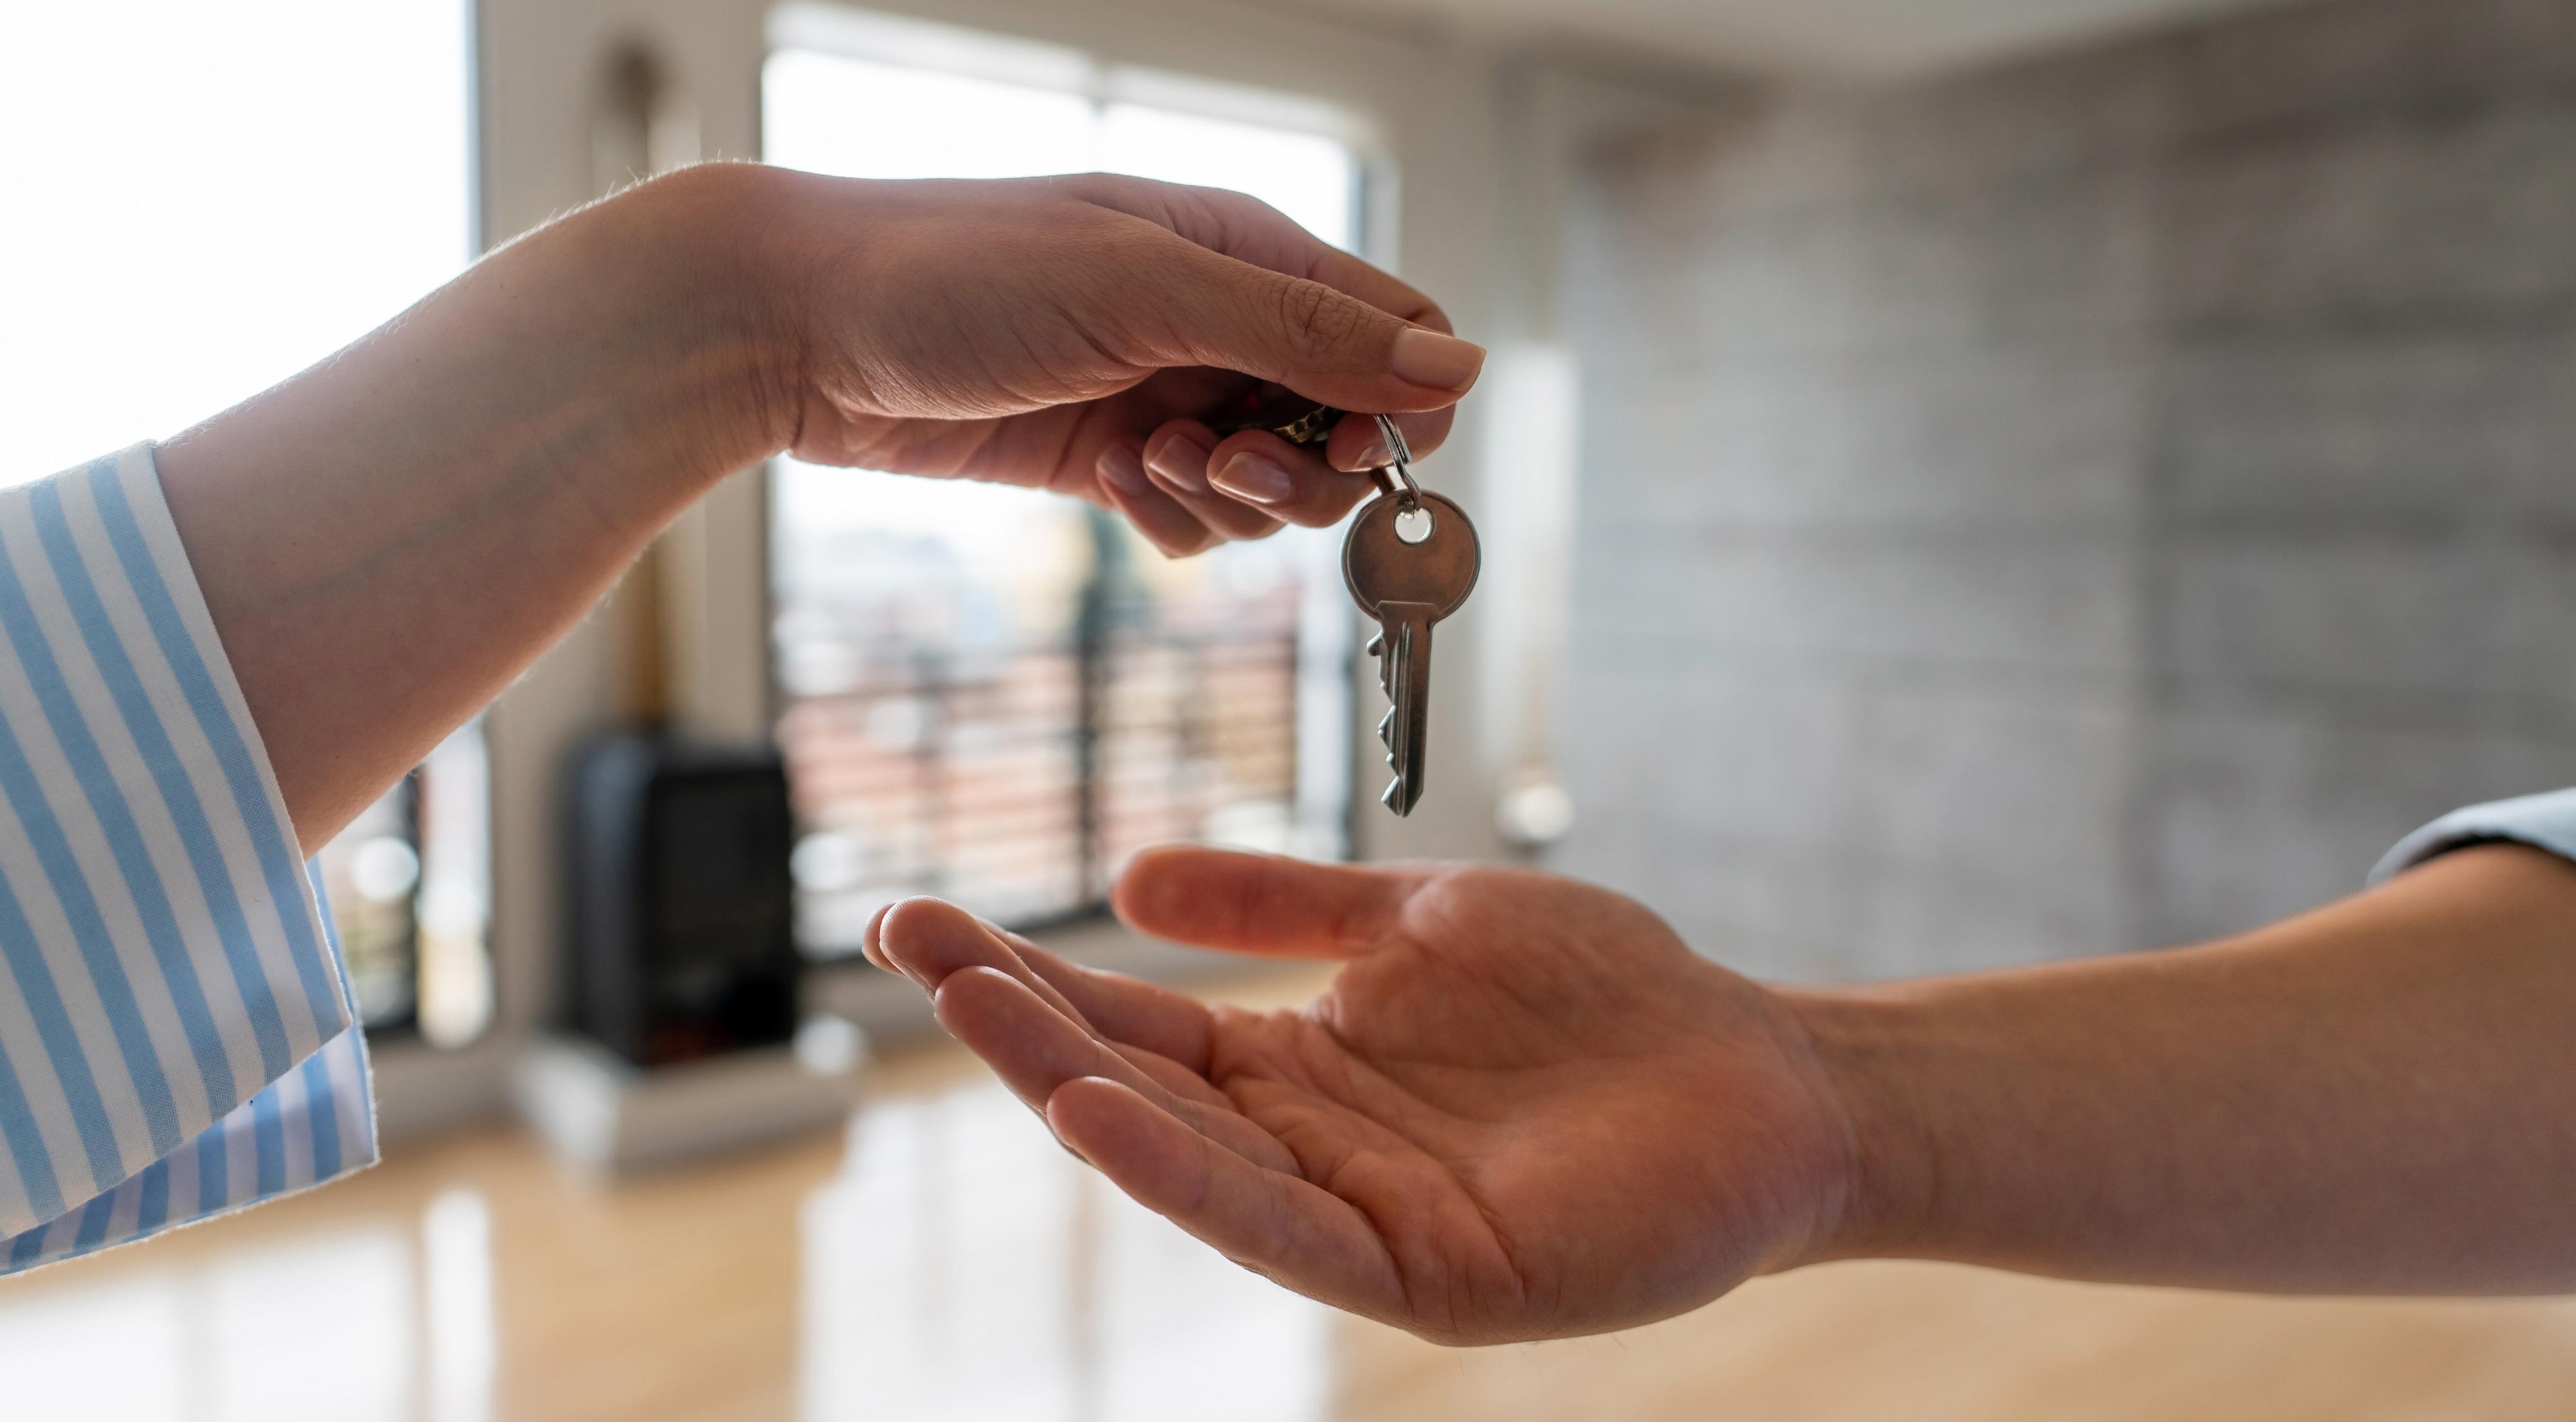 Handing over keys to a house.